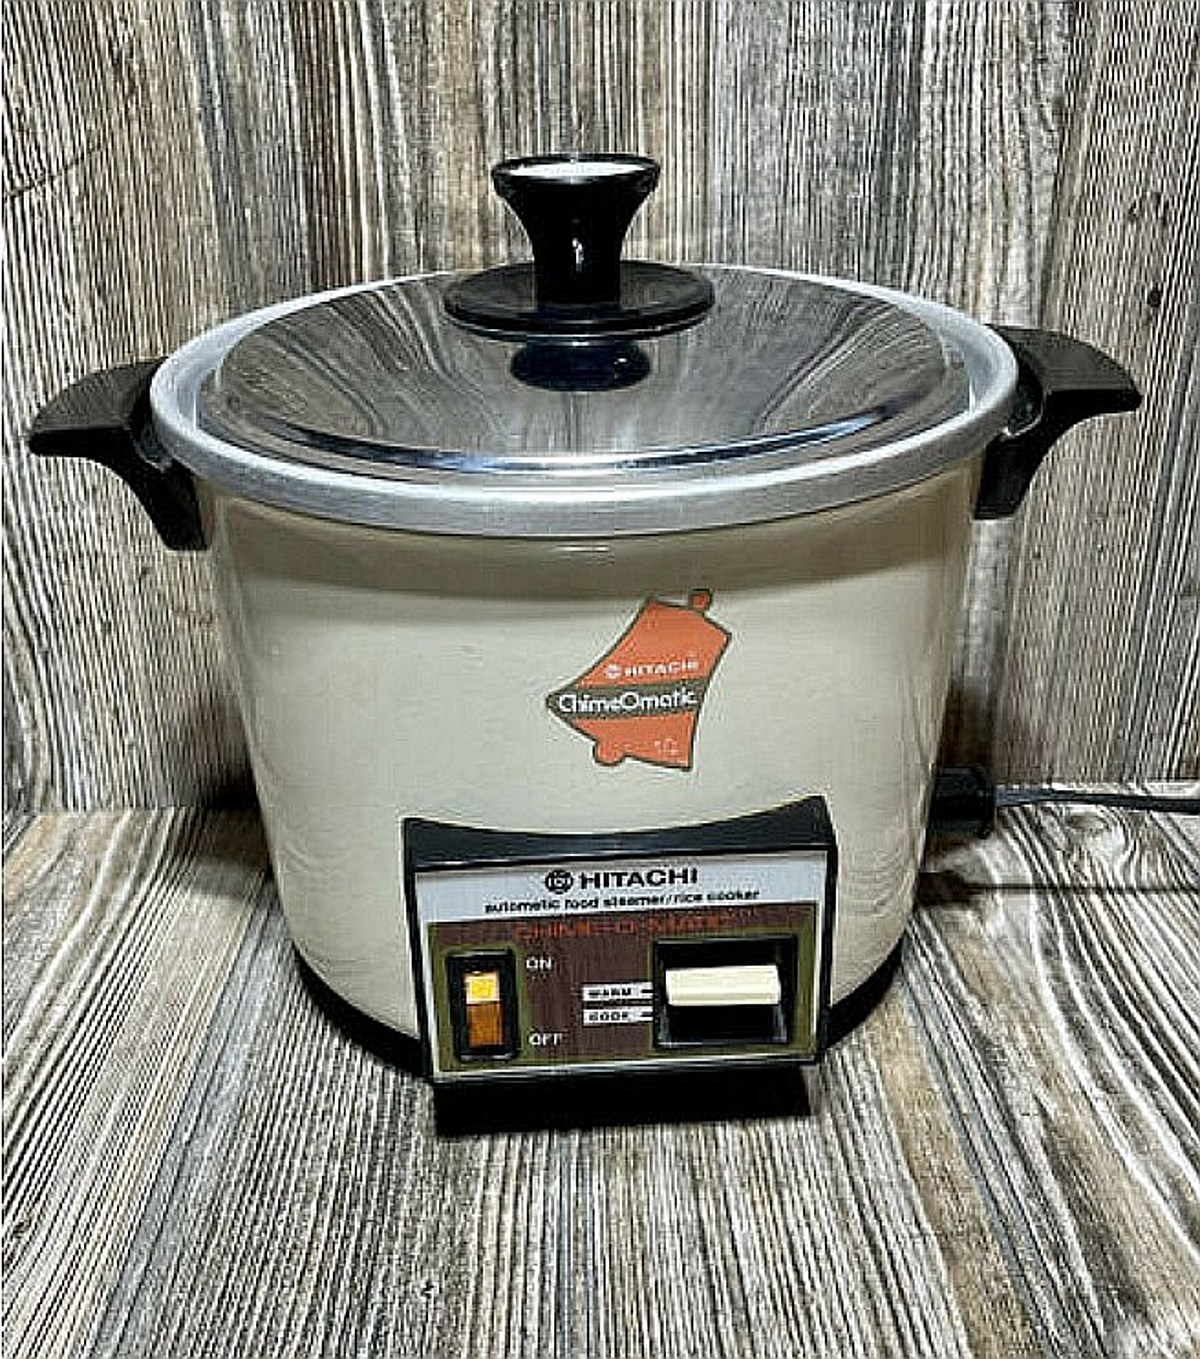 https://townsquare.media/site/33/files/2022/04/attachment-Bettysbuys-74-225-Chime-O-Matic-Food-Steamer-Rice1.jpg?w=1200&h=0&zc=1&s=0&a=t&q=89